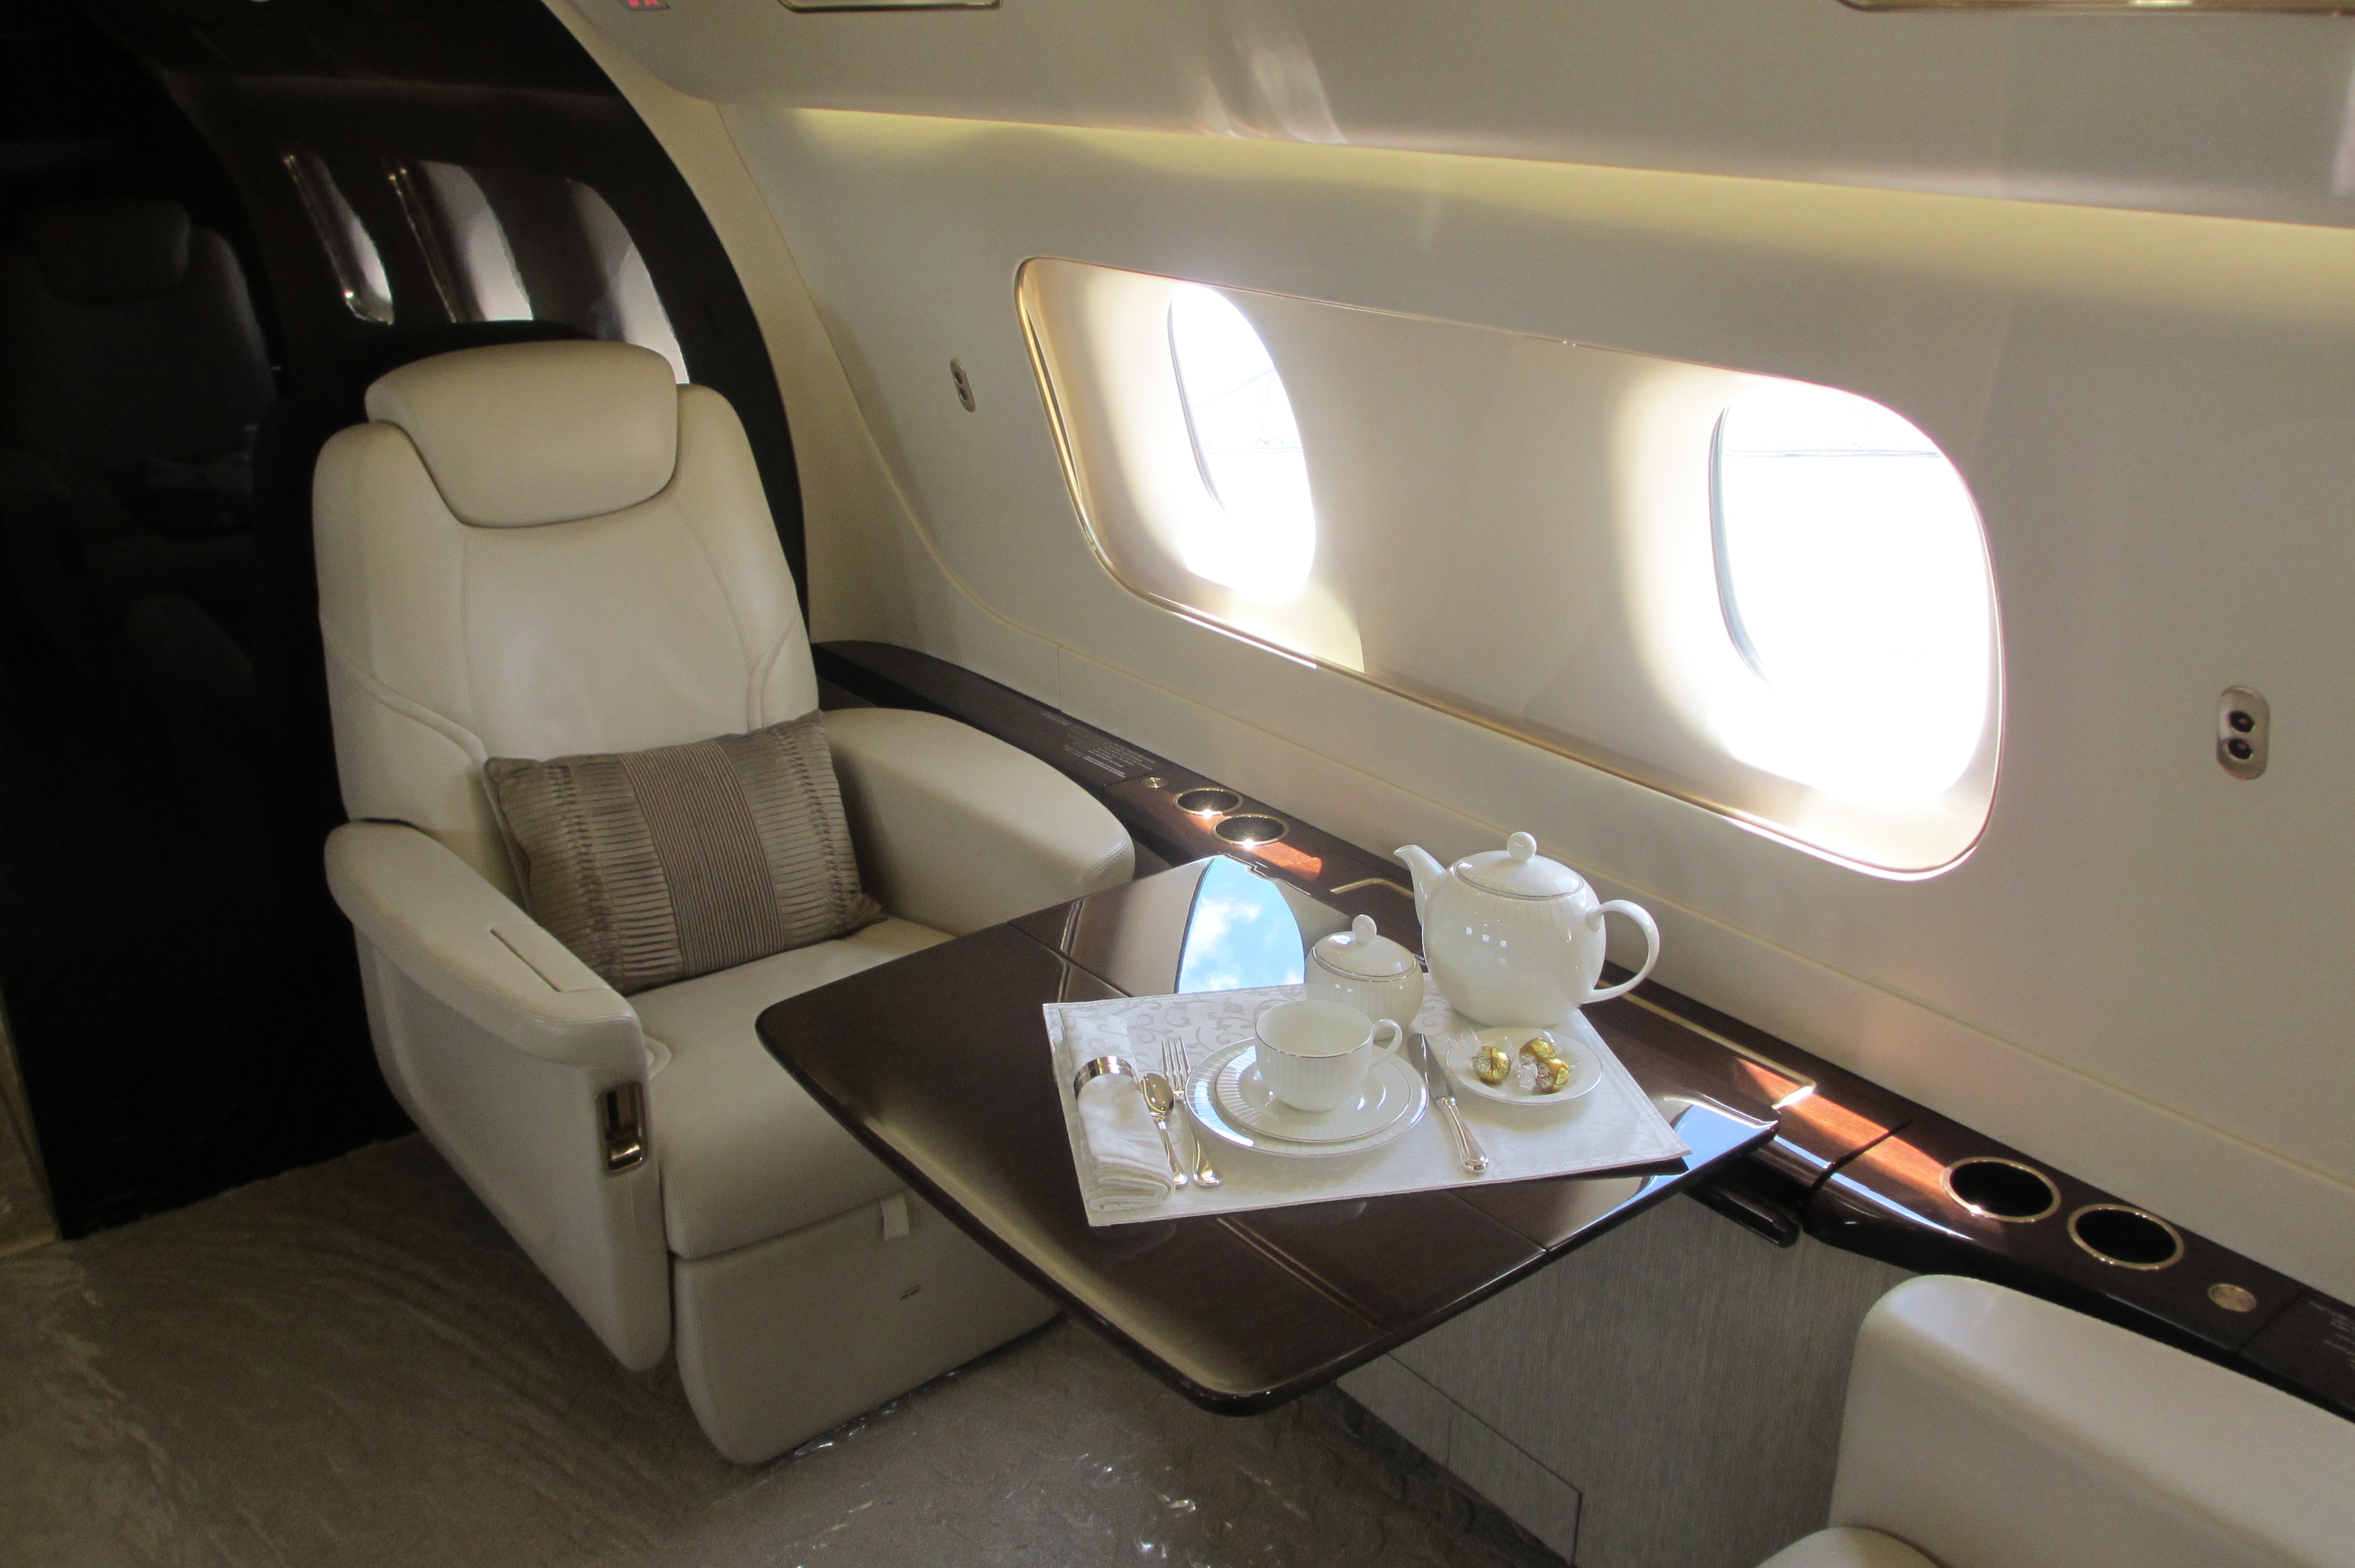 Embraer Lineage 1000 interior seat